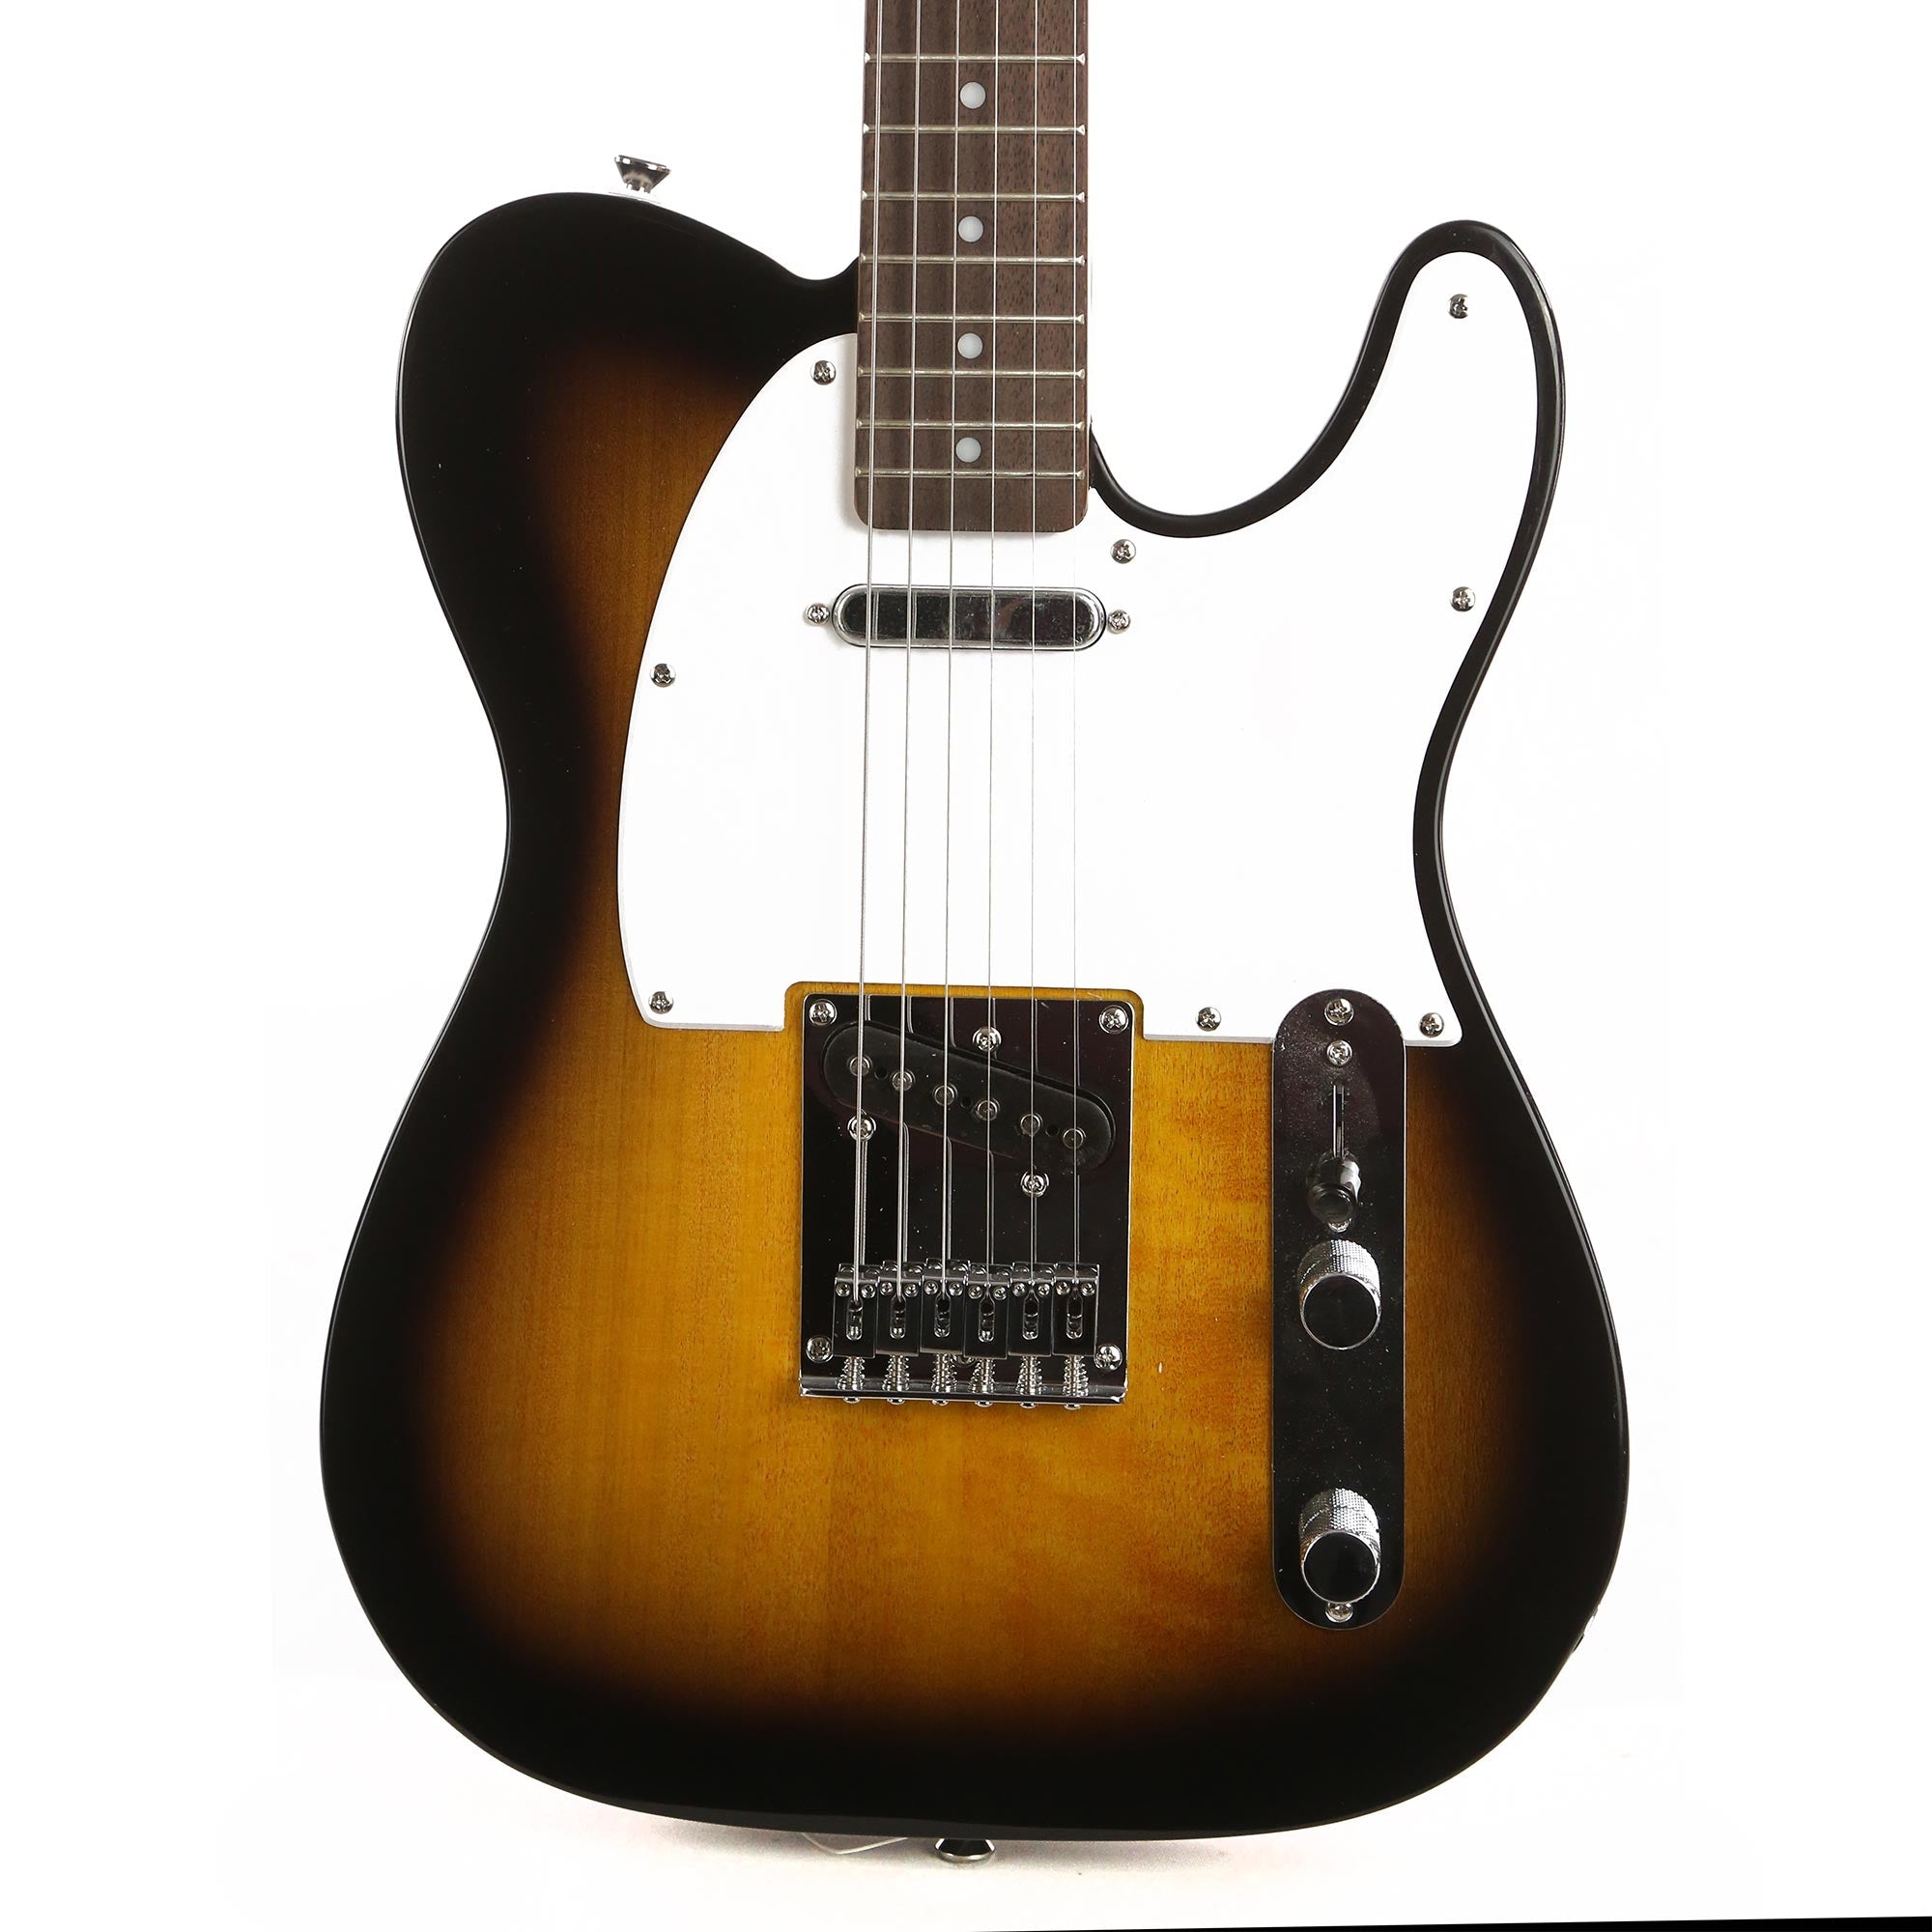 Squier Bullet Telecaster Brown Sunburst Used | The Music Zoo